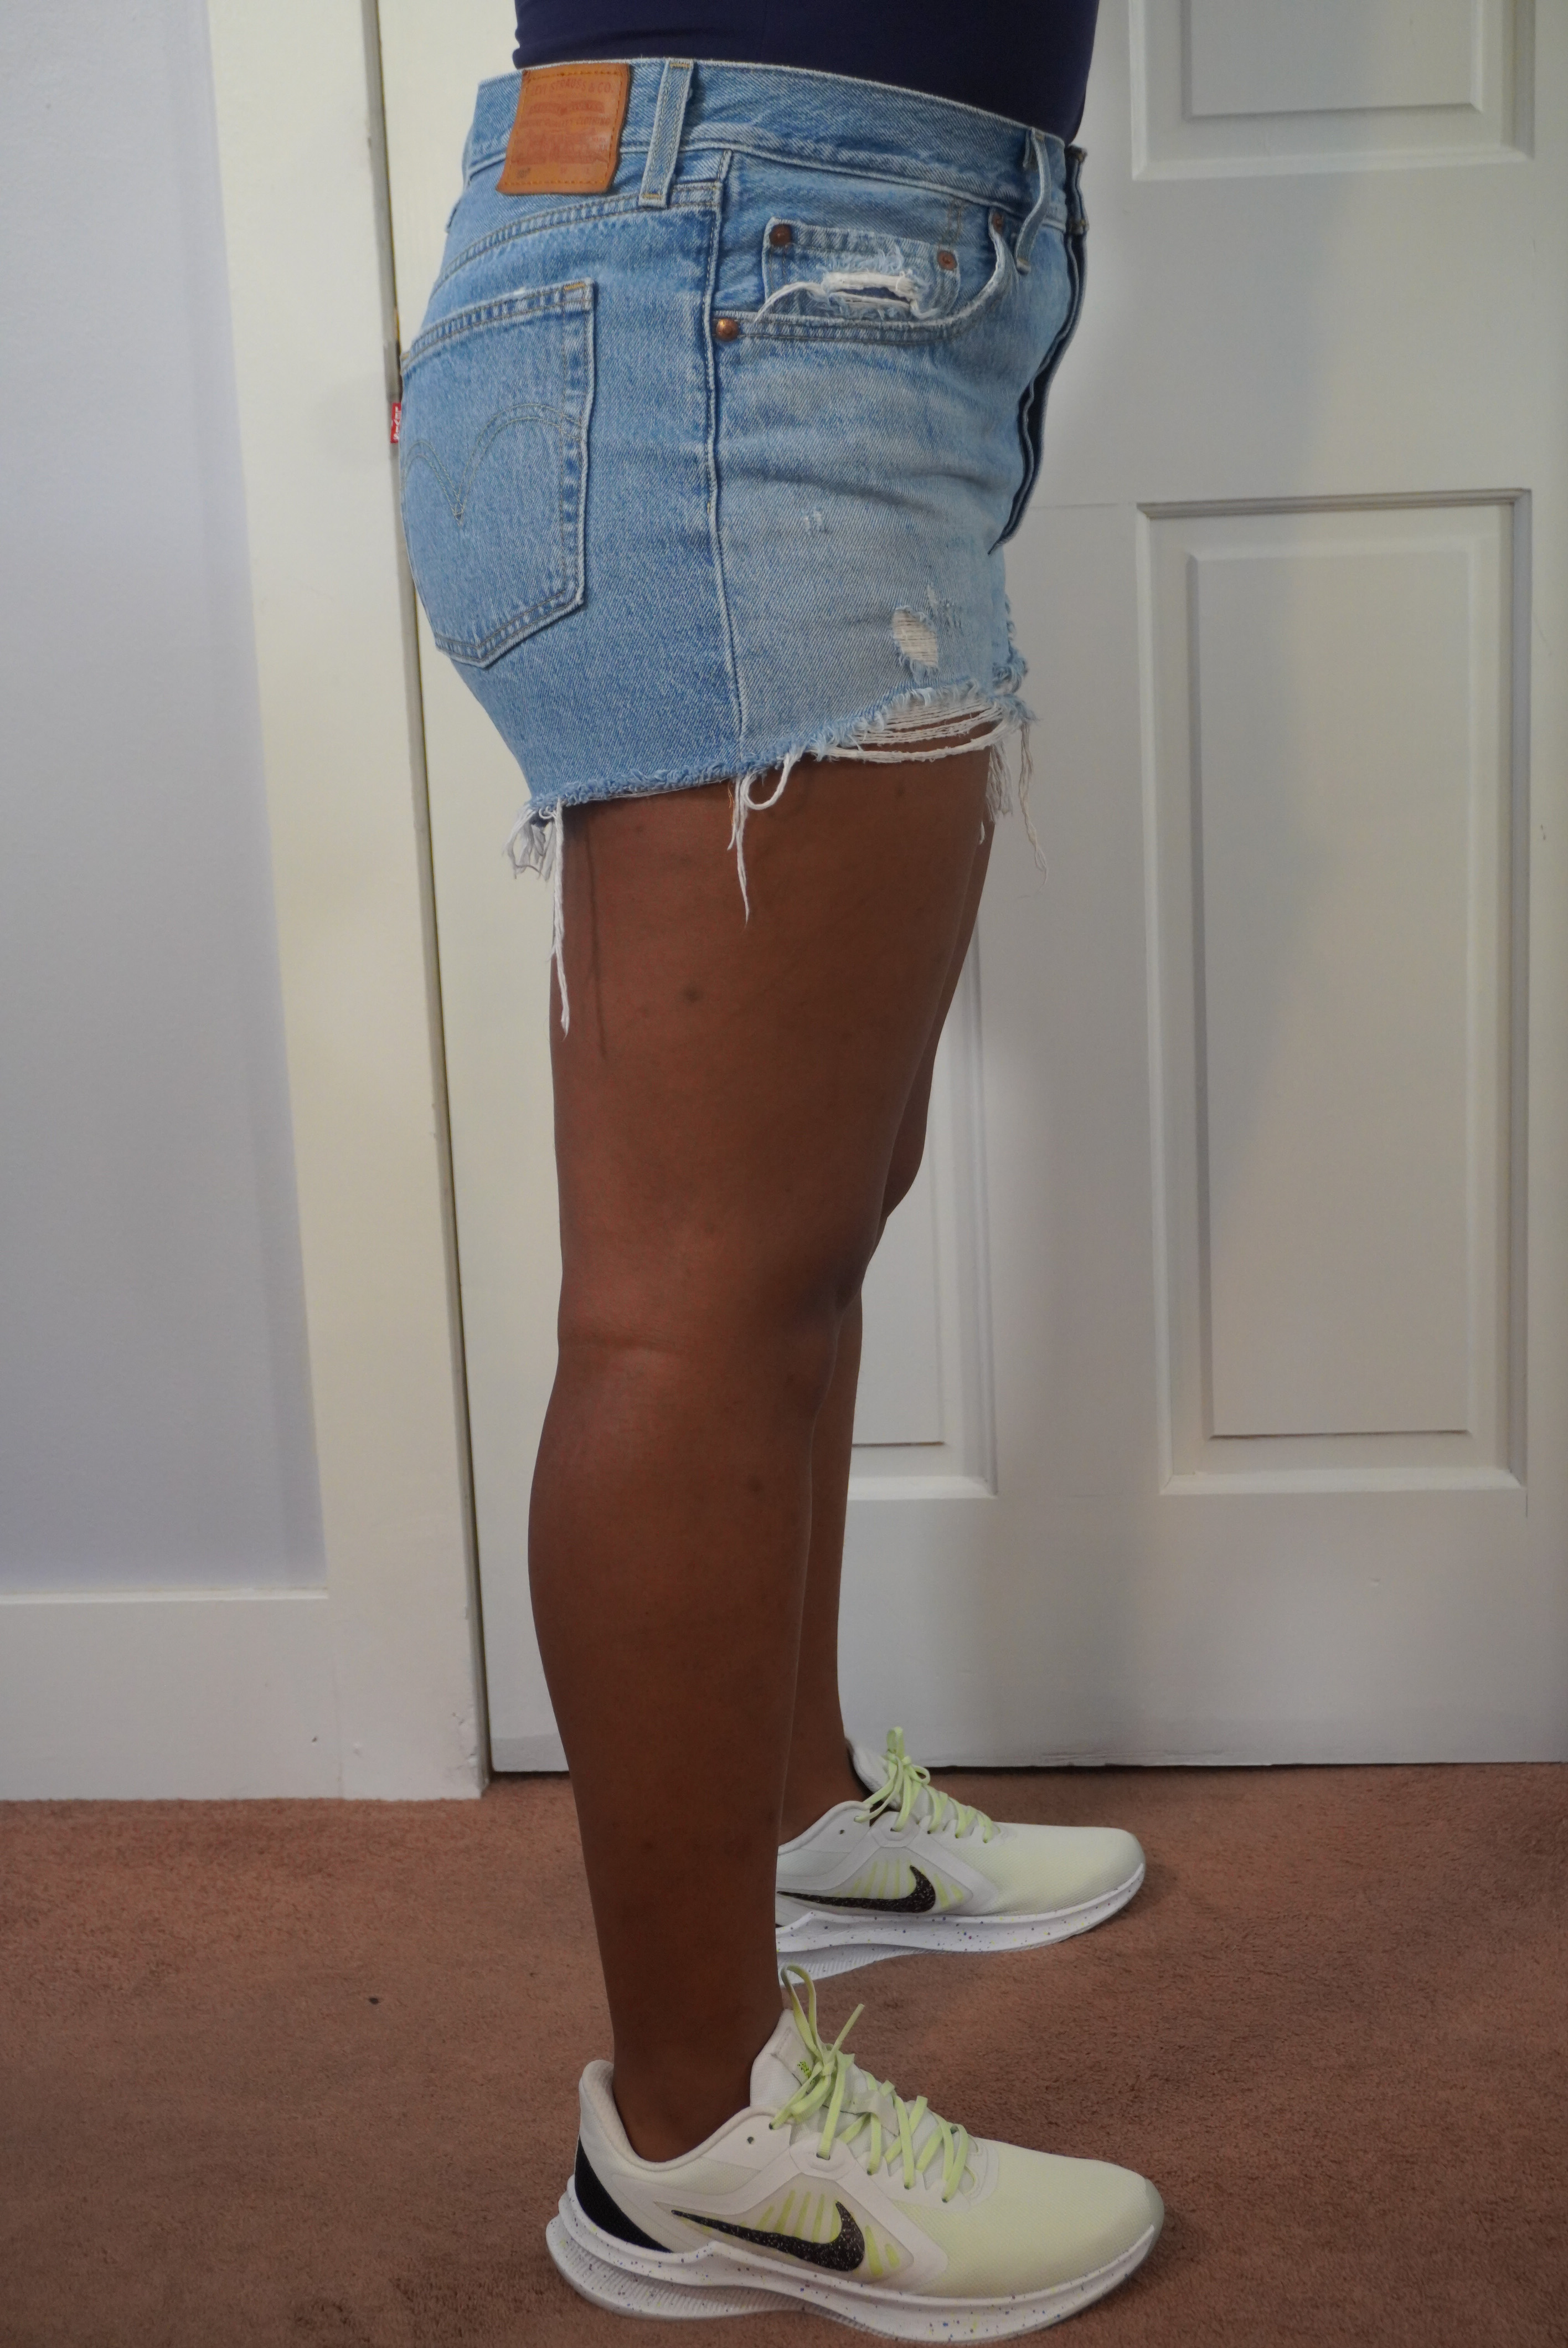 This image shows a side view of a pair of 501 Levi's shorts on the author. The side view shows the brown Levi's patch and the pockets with rivets.